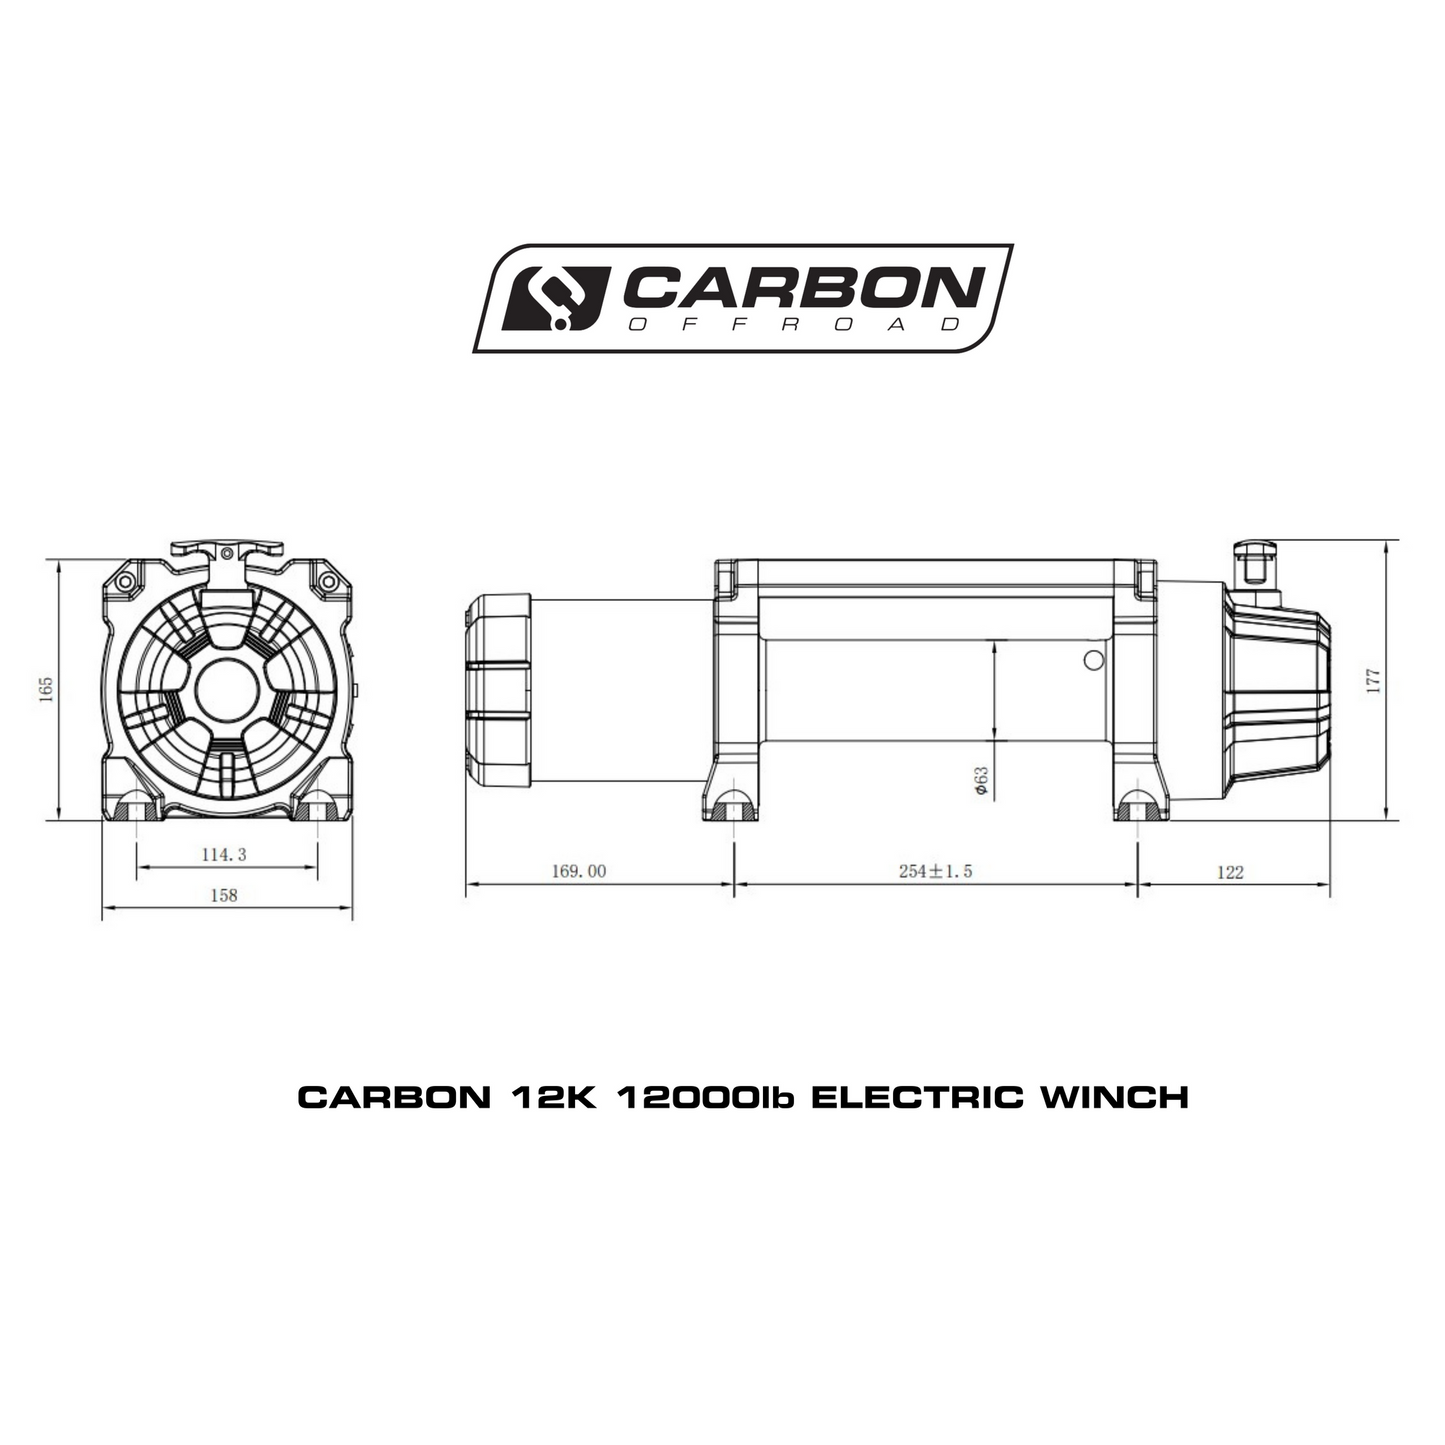 Carbon 12K V.3 12000lb Winch Yellow Hook Installers Combo Deal - CW-12KV3Y-COMBO1 3